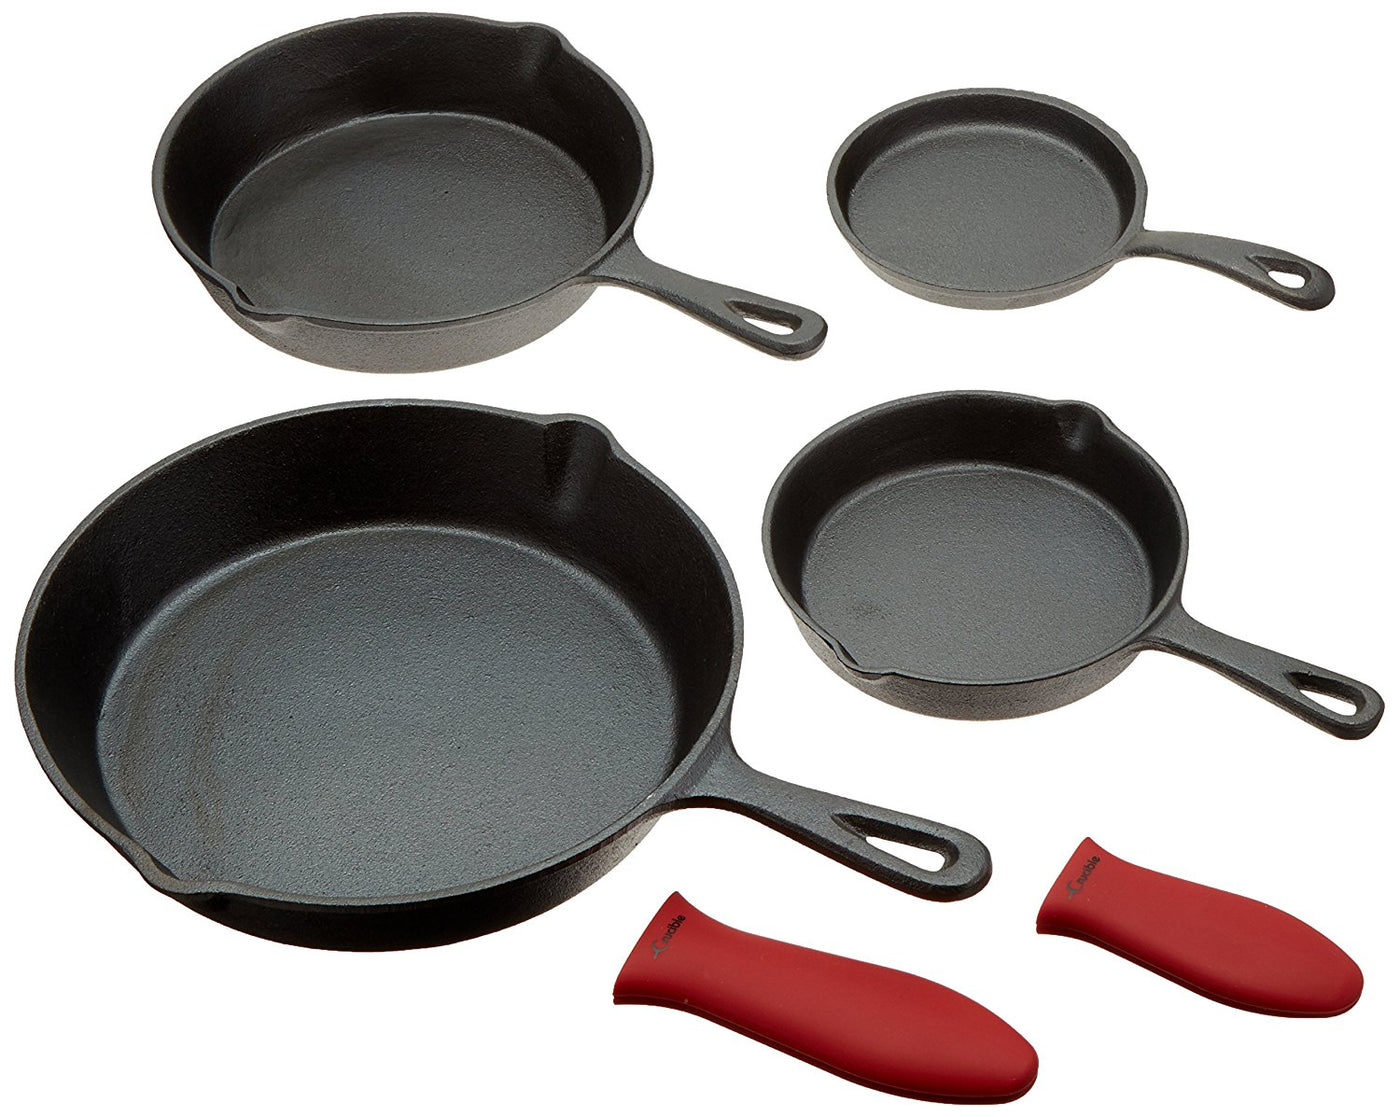 Cast Iron Skillets, Frying Pan Set Of 4 in different sizes, 2 Silicone Potholders